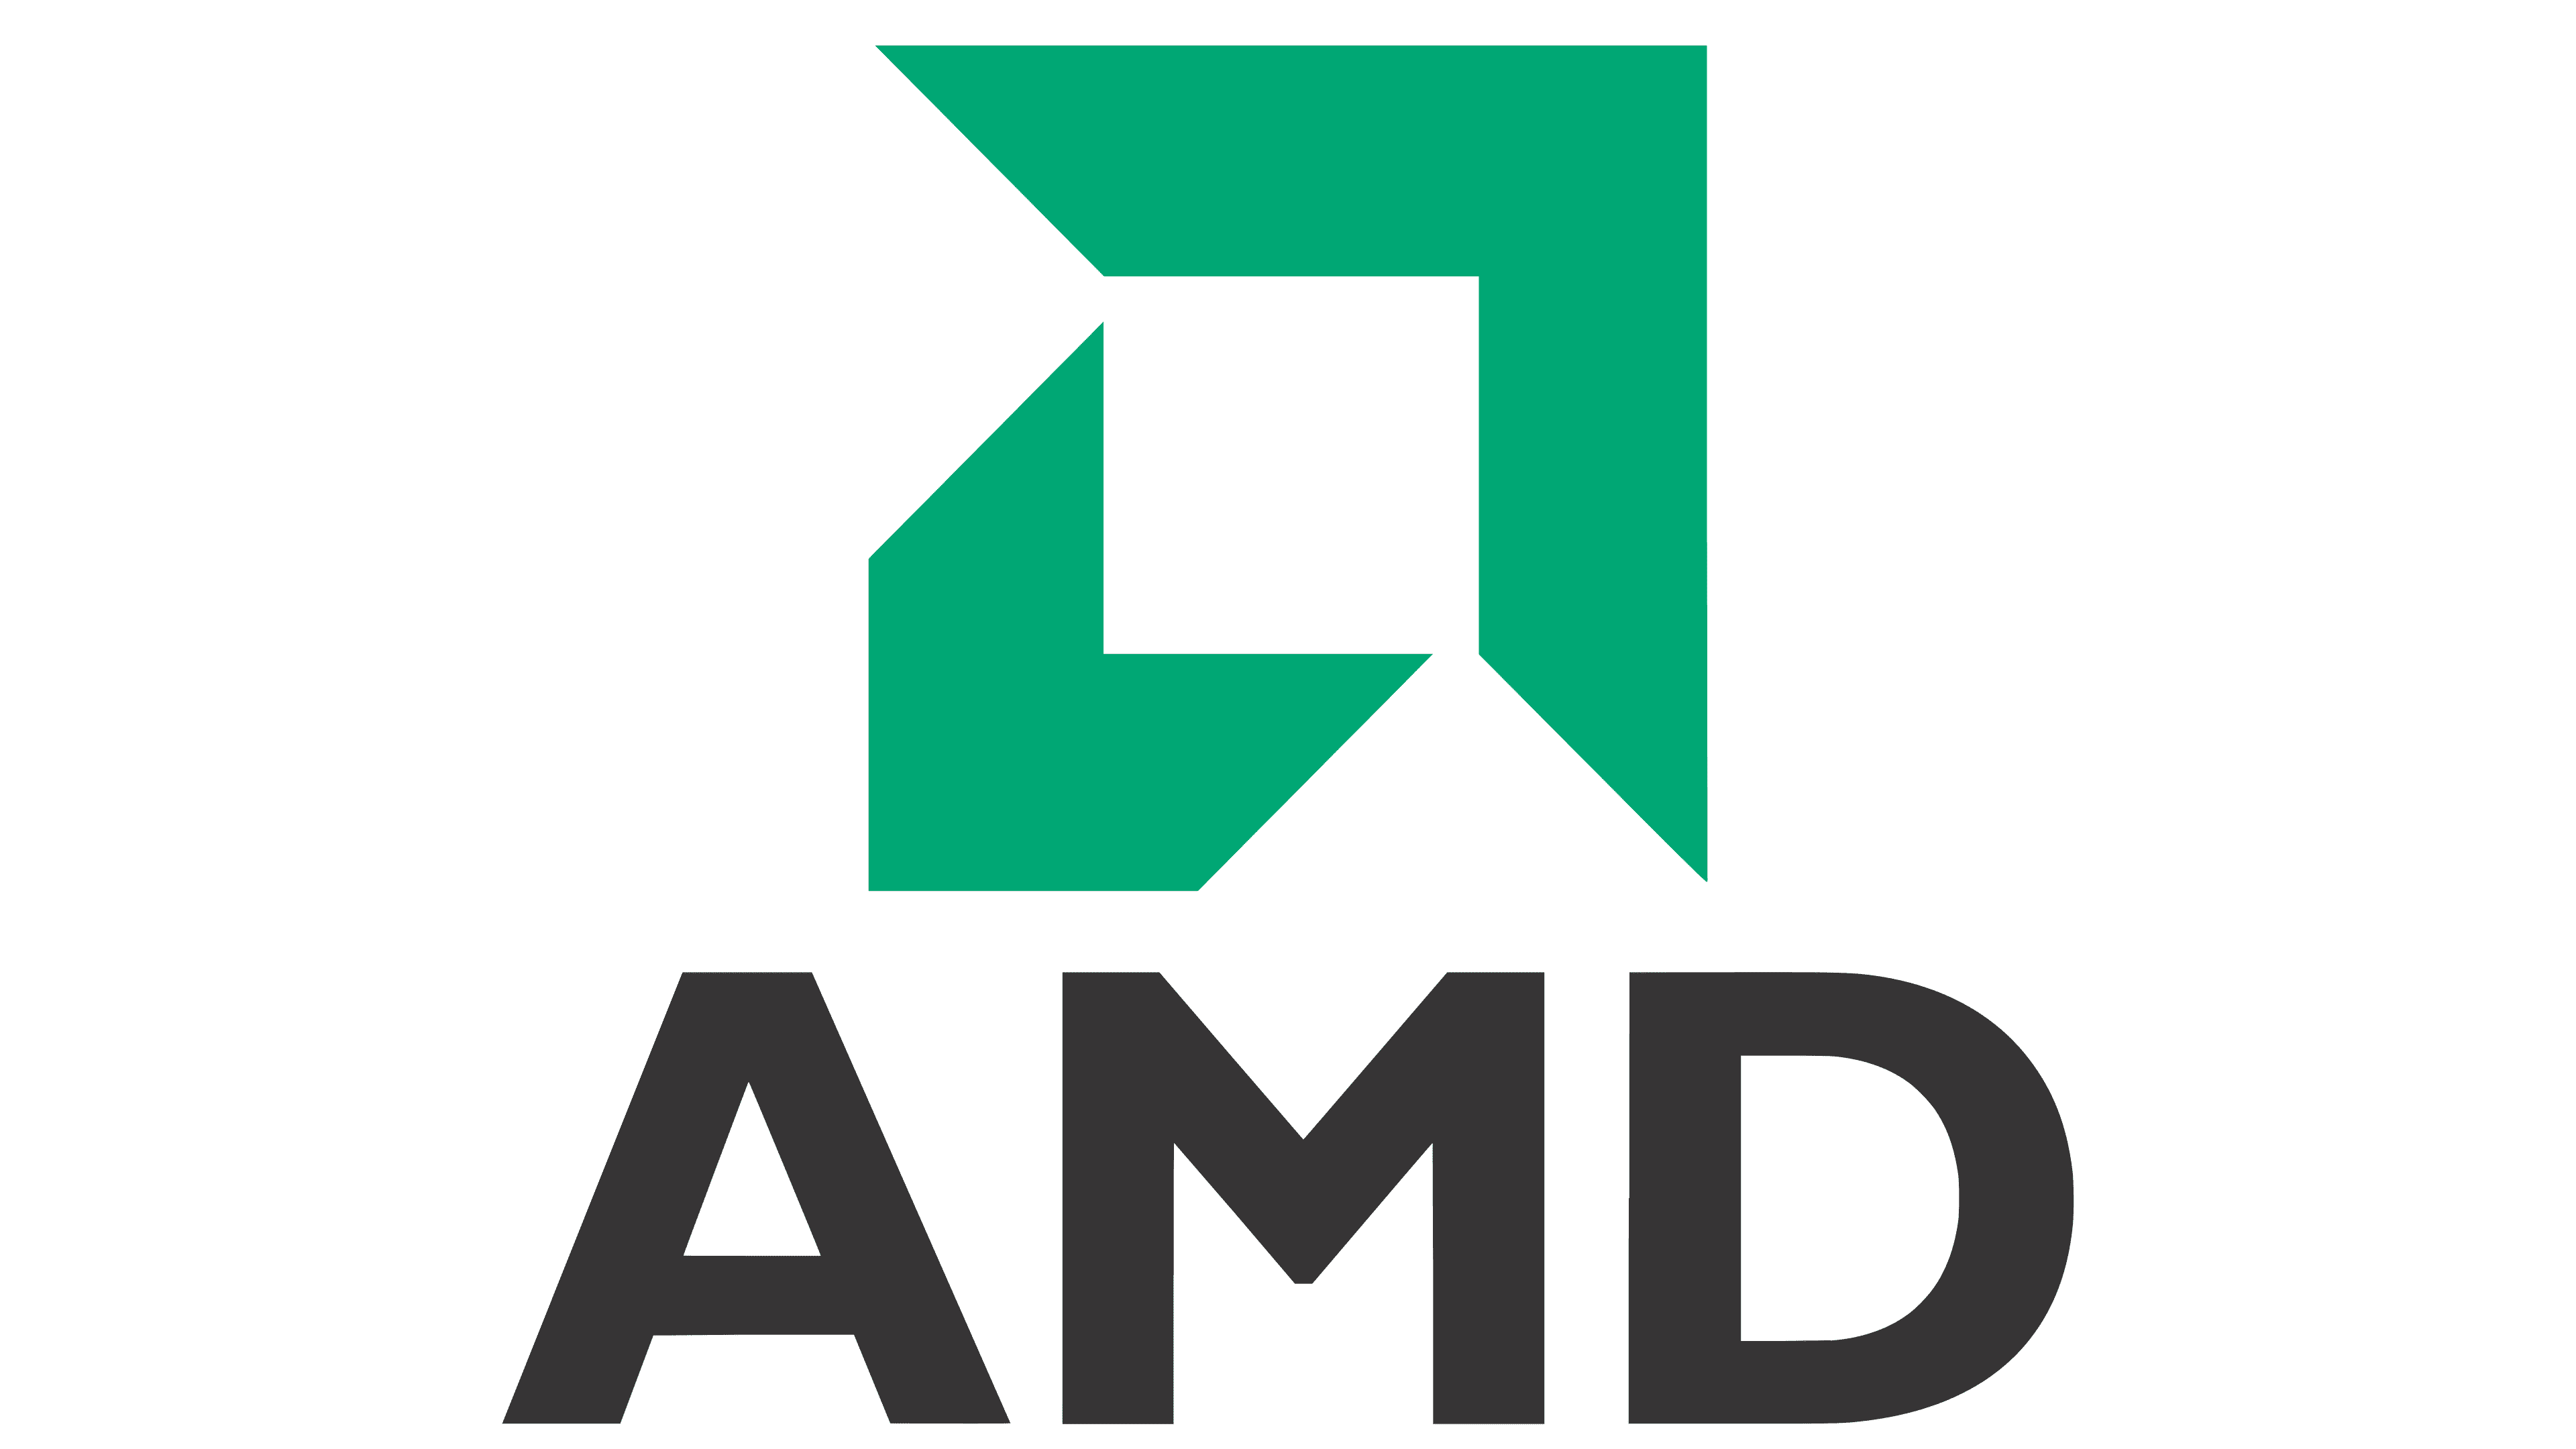 AMD To Rally Around 39%? Here Are 5 Other Price Target Changes For Monday